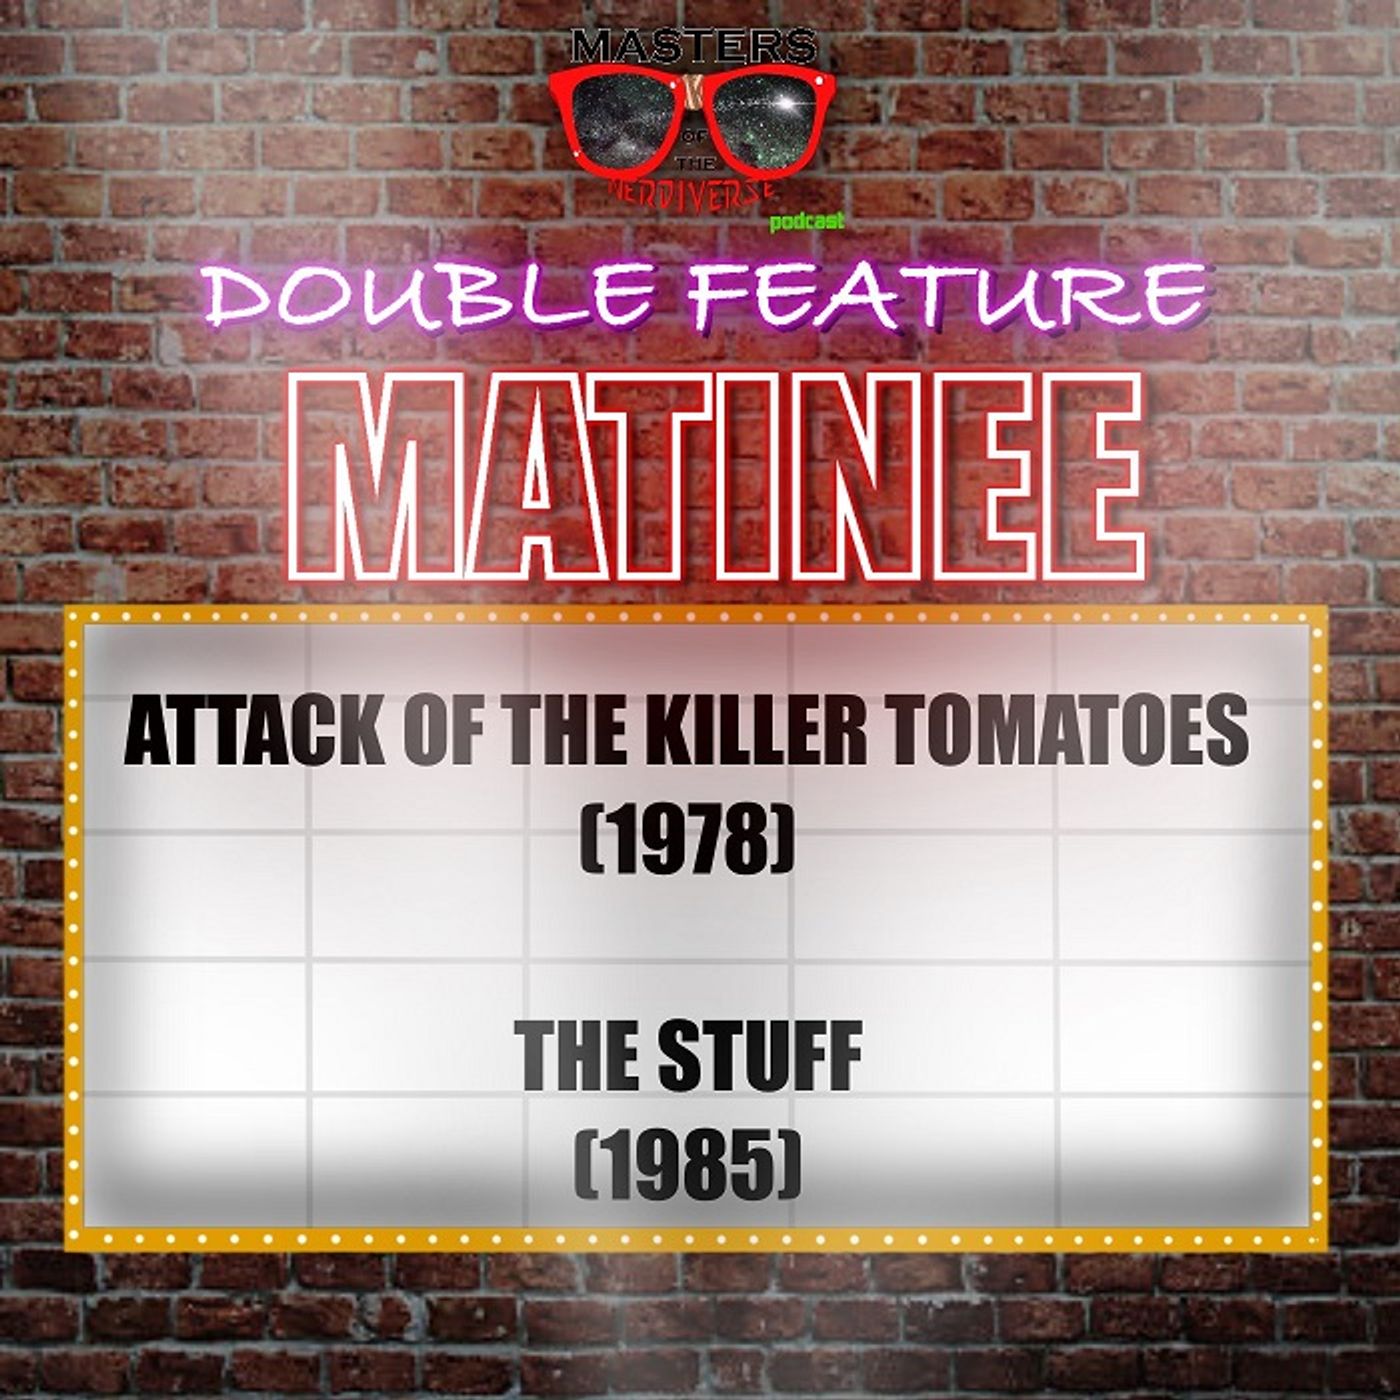 MOTN Matinee: Attack of the Killer Tomatoes (1978) and The Stuff (1985)